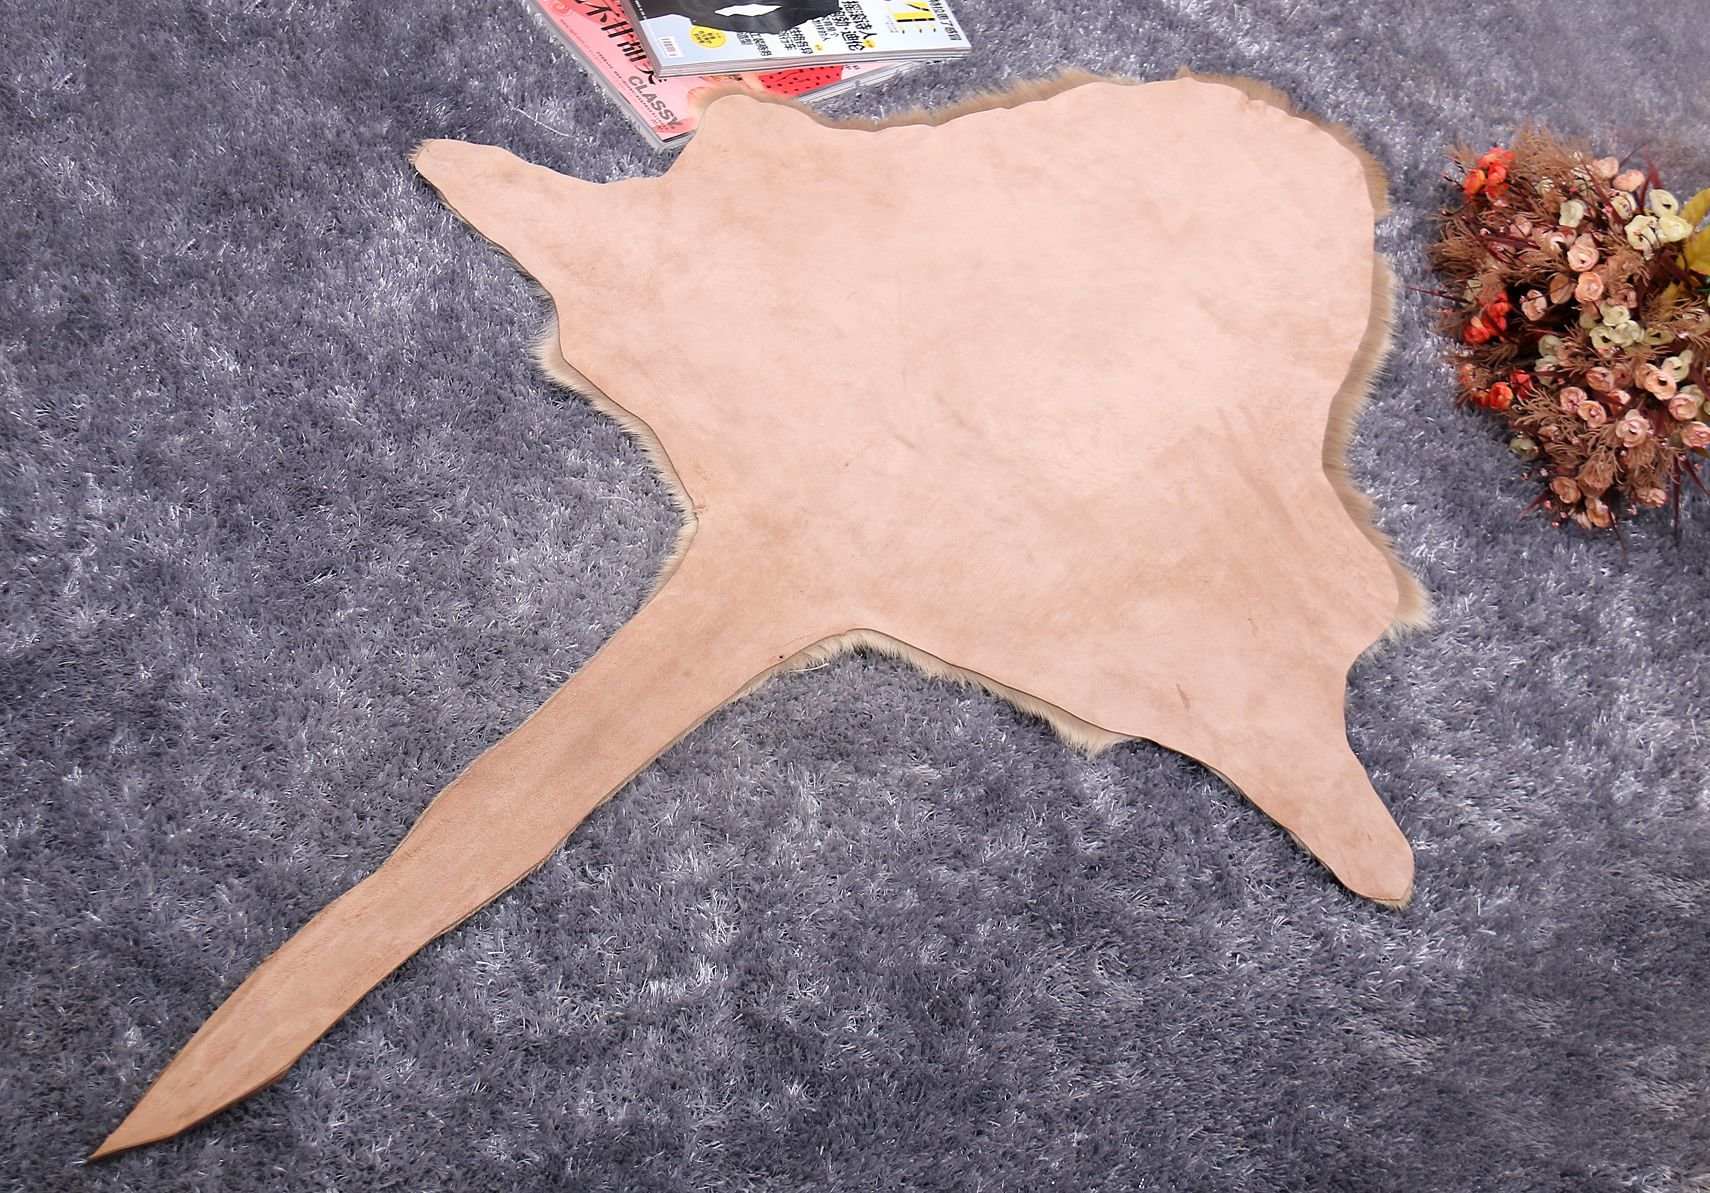 the rug of kangaroo skin is used as home decoration, carpet and gift